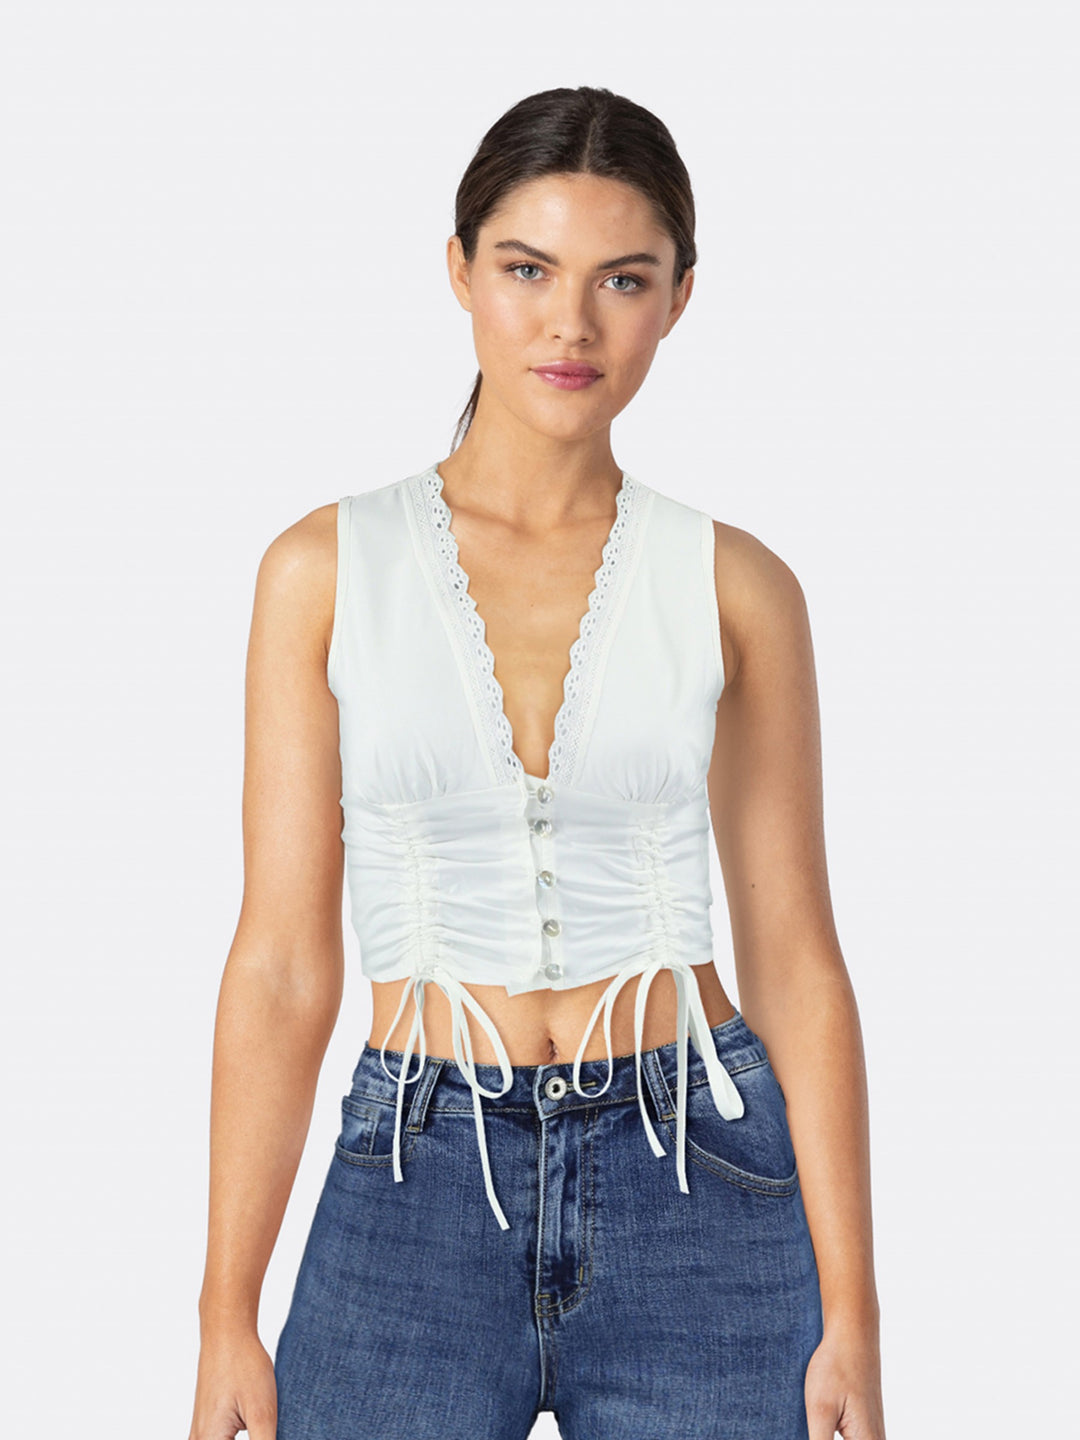 Sleeveless Blouse Featuring Adjustable Draping White Front Close